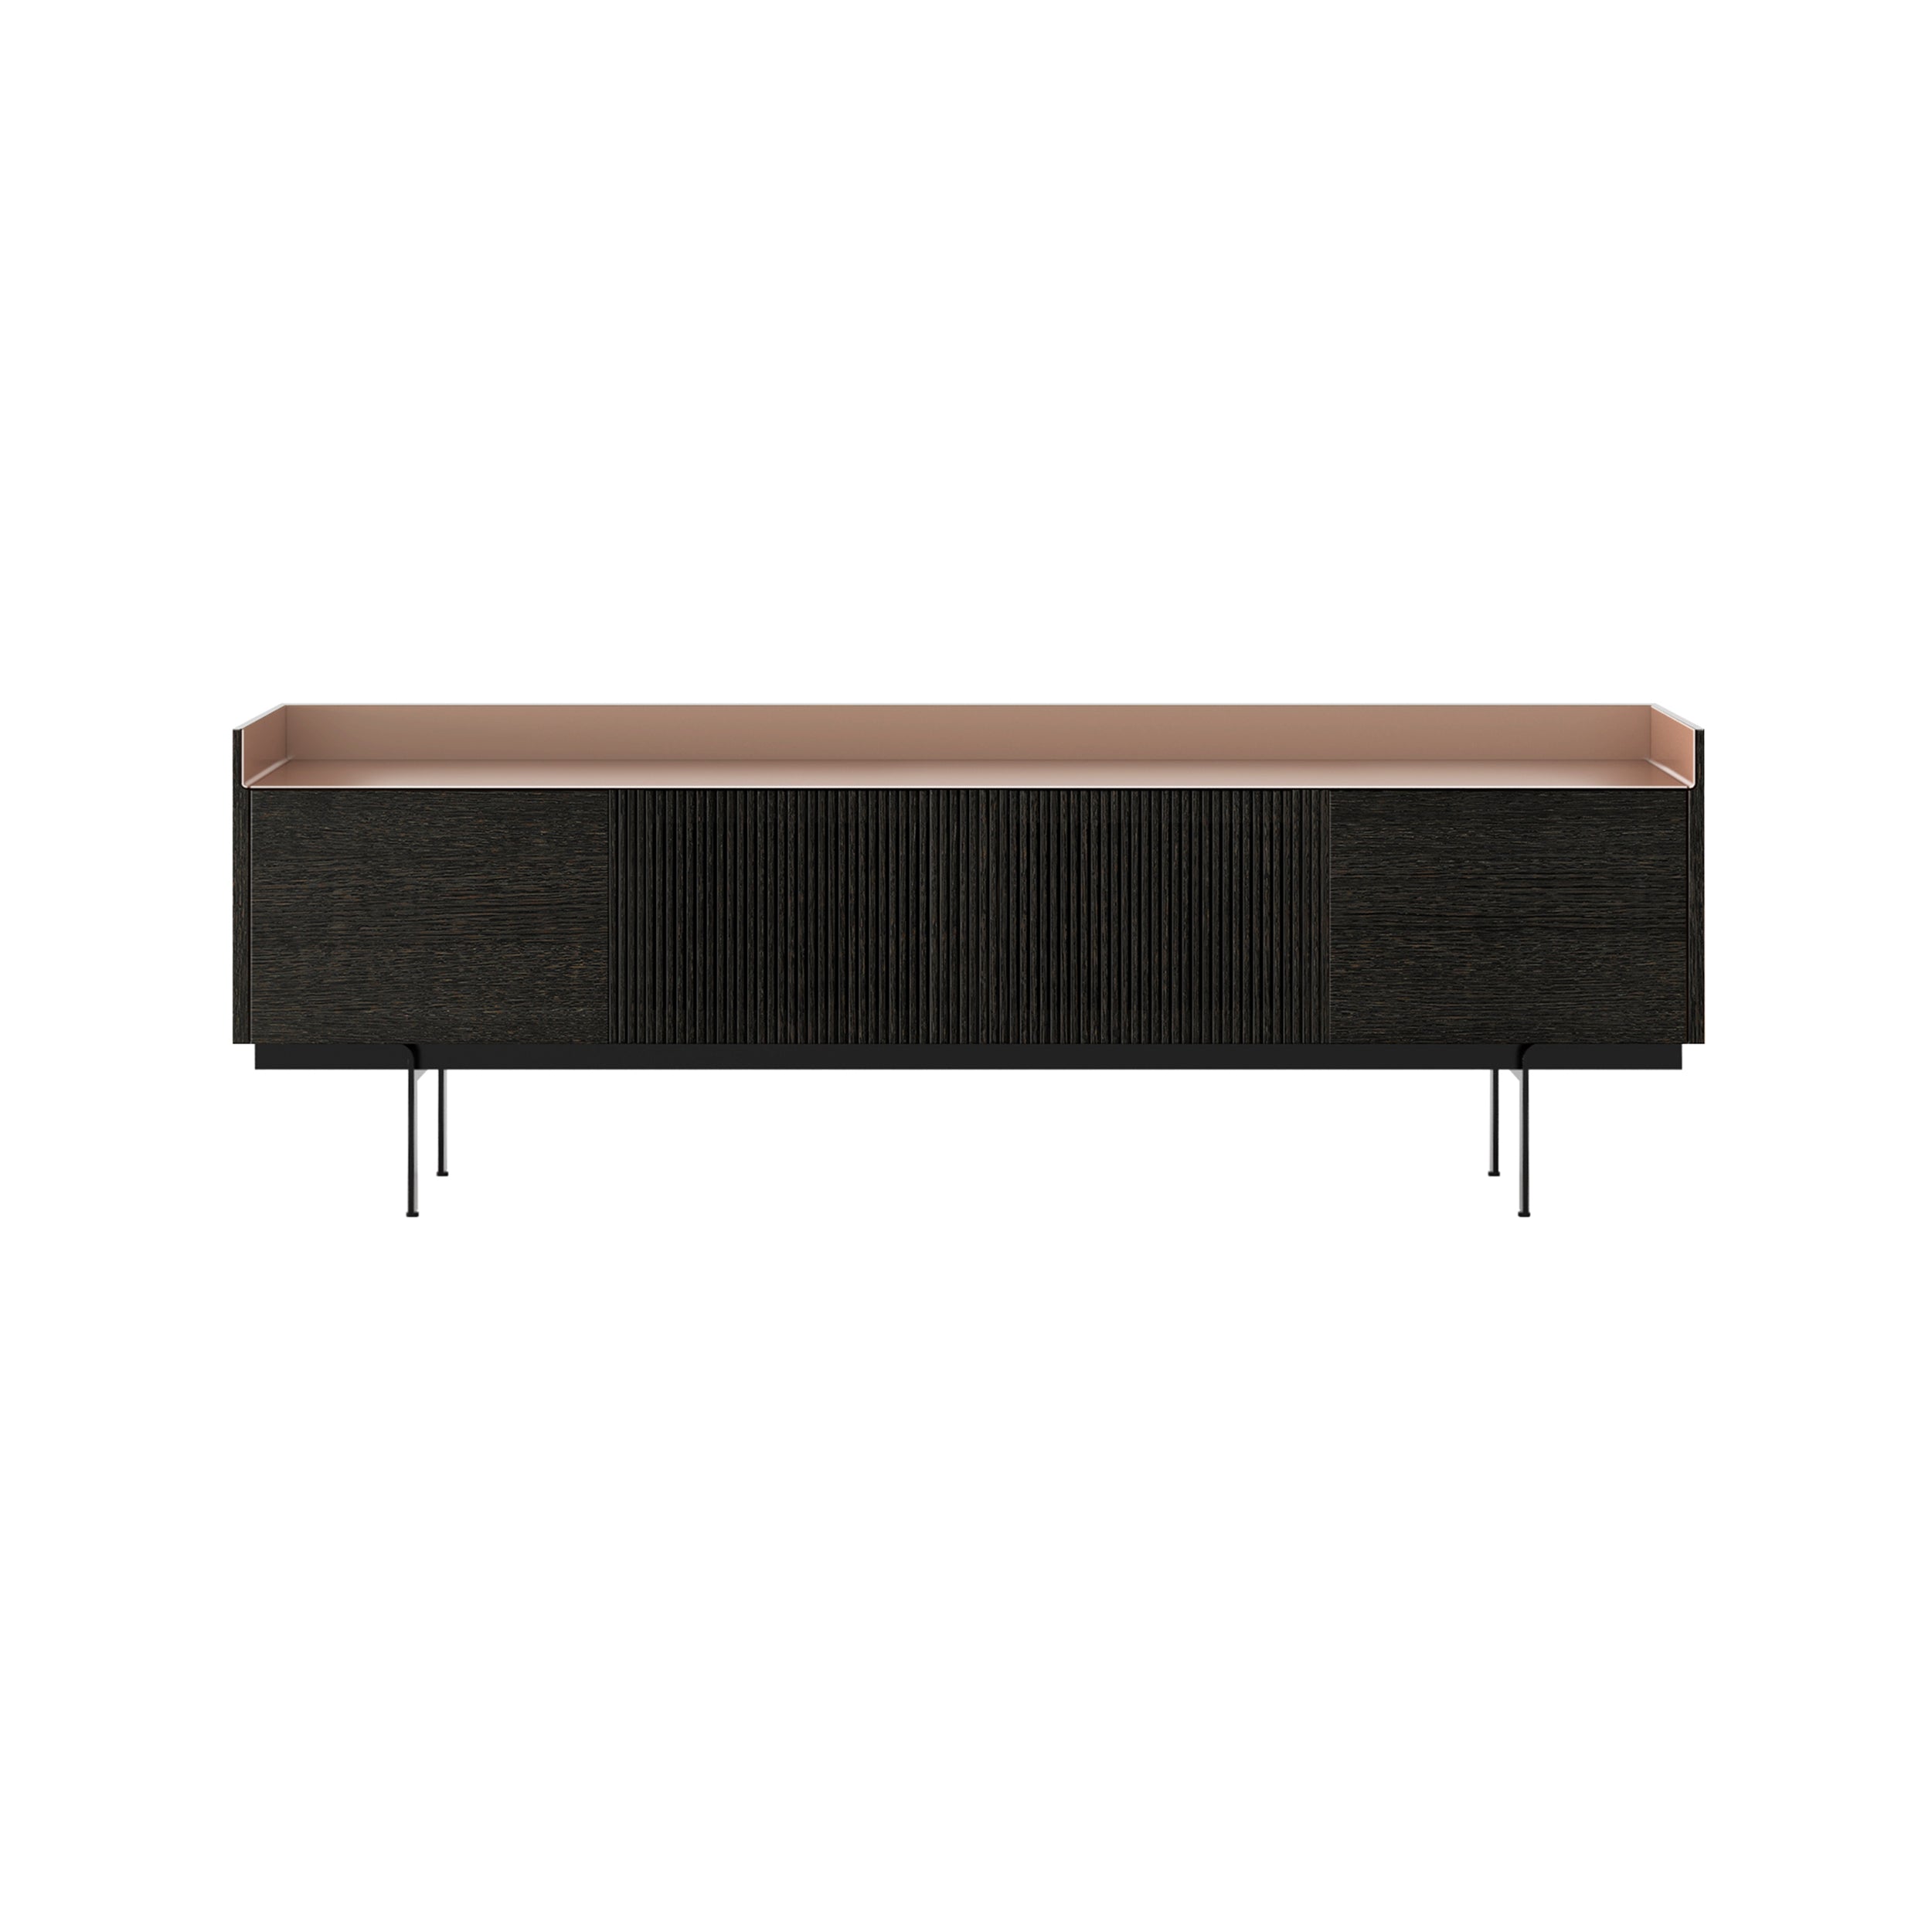 Stockholm Technic Sideboard: STH403 + Dark Grey Stained Oak + Anodized Aluminum Pale Rose + Black